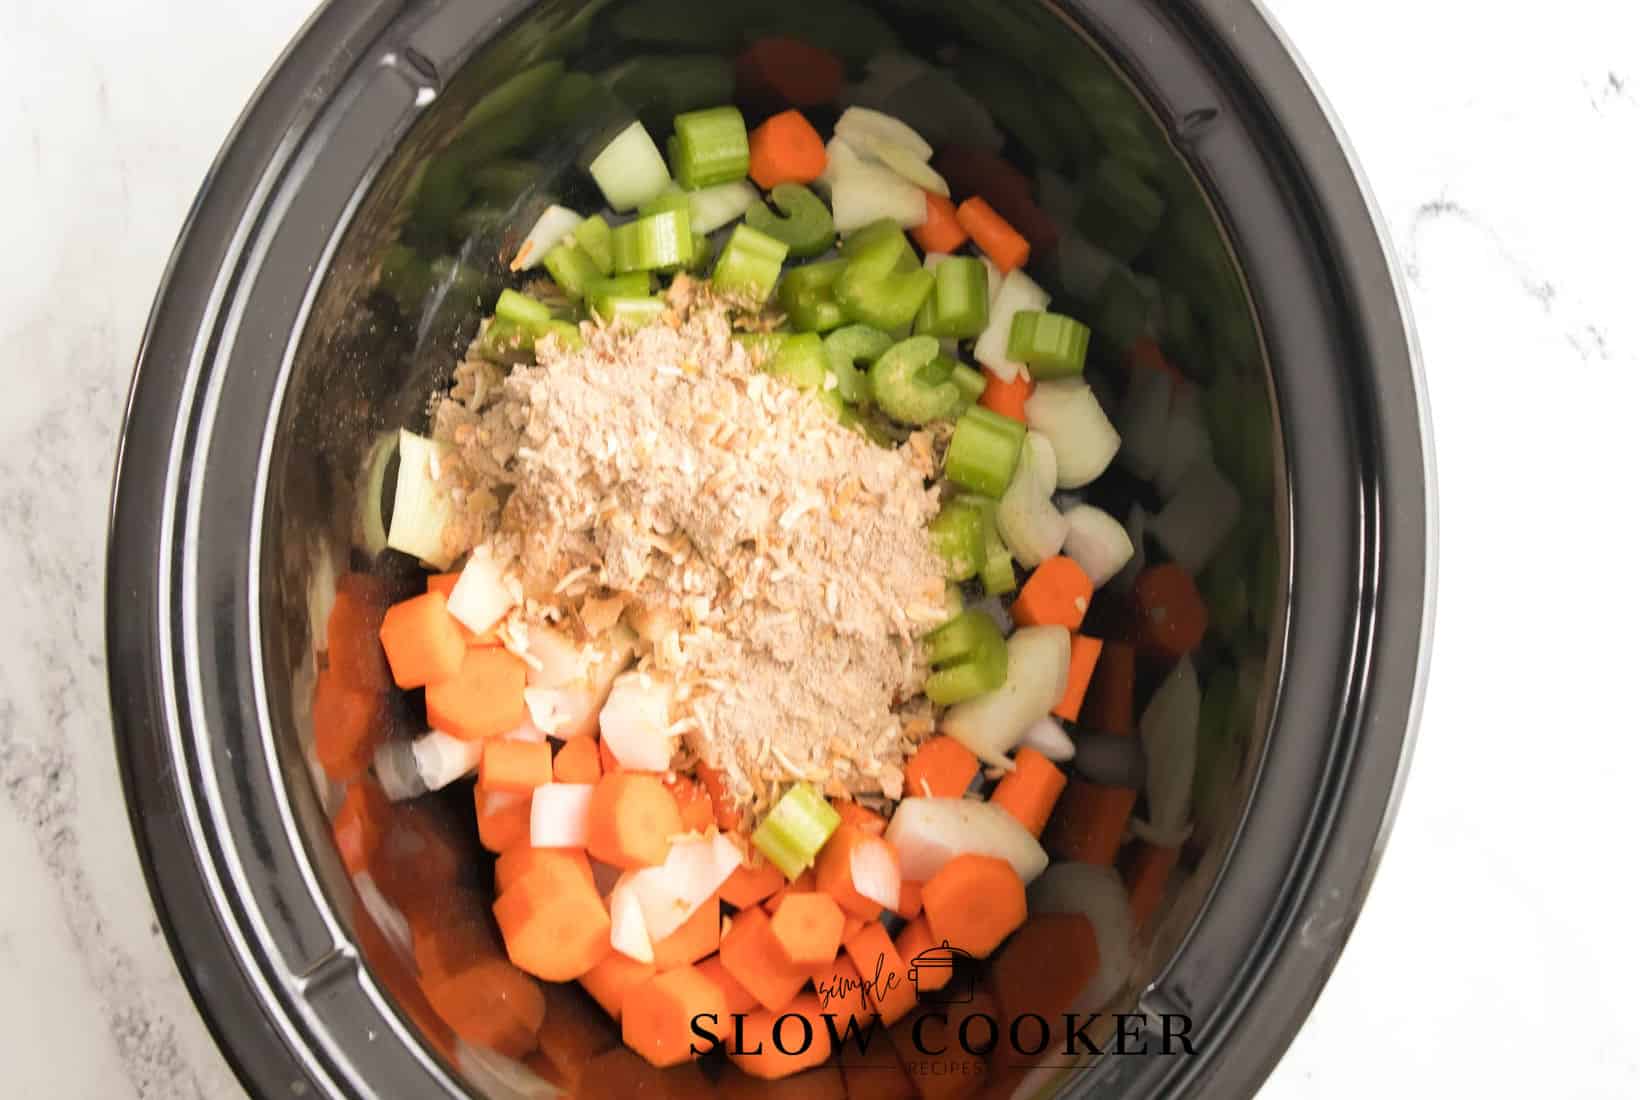 onion soup mix poured over cellery, carrots and onions in a slow cooker.